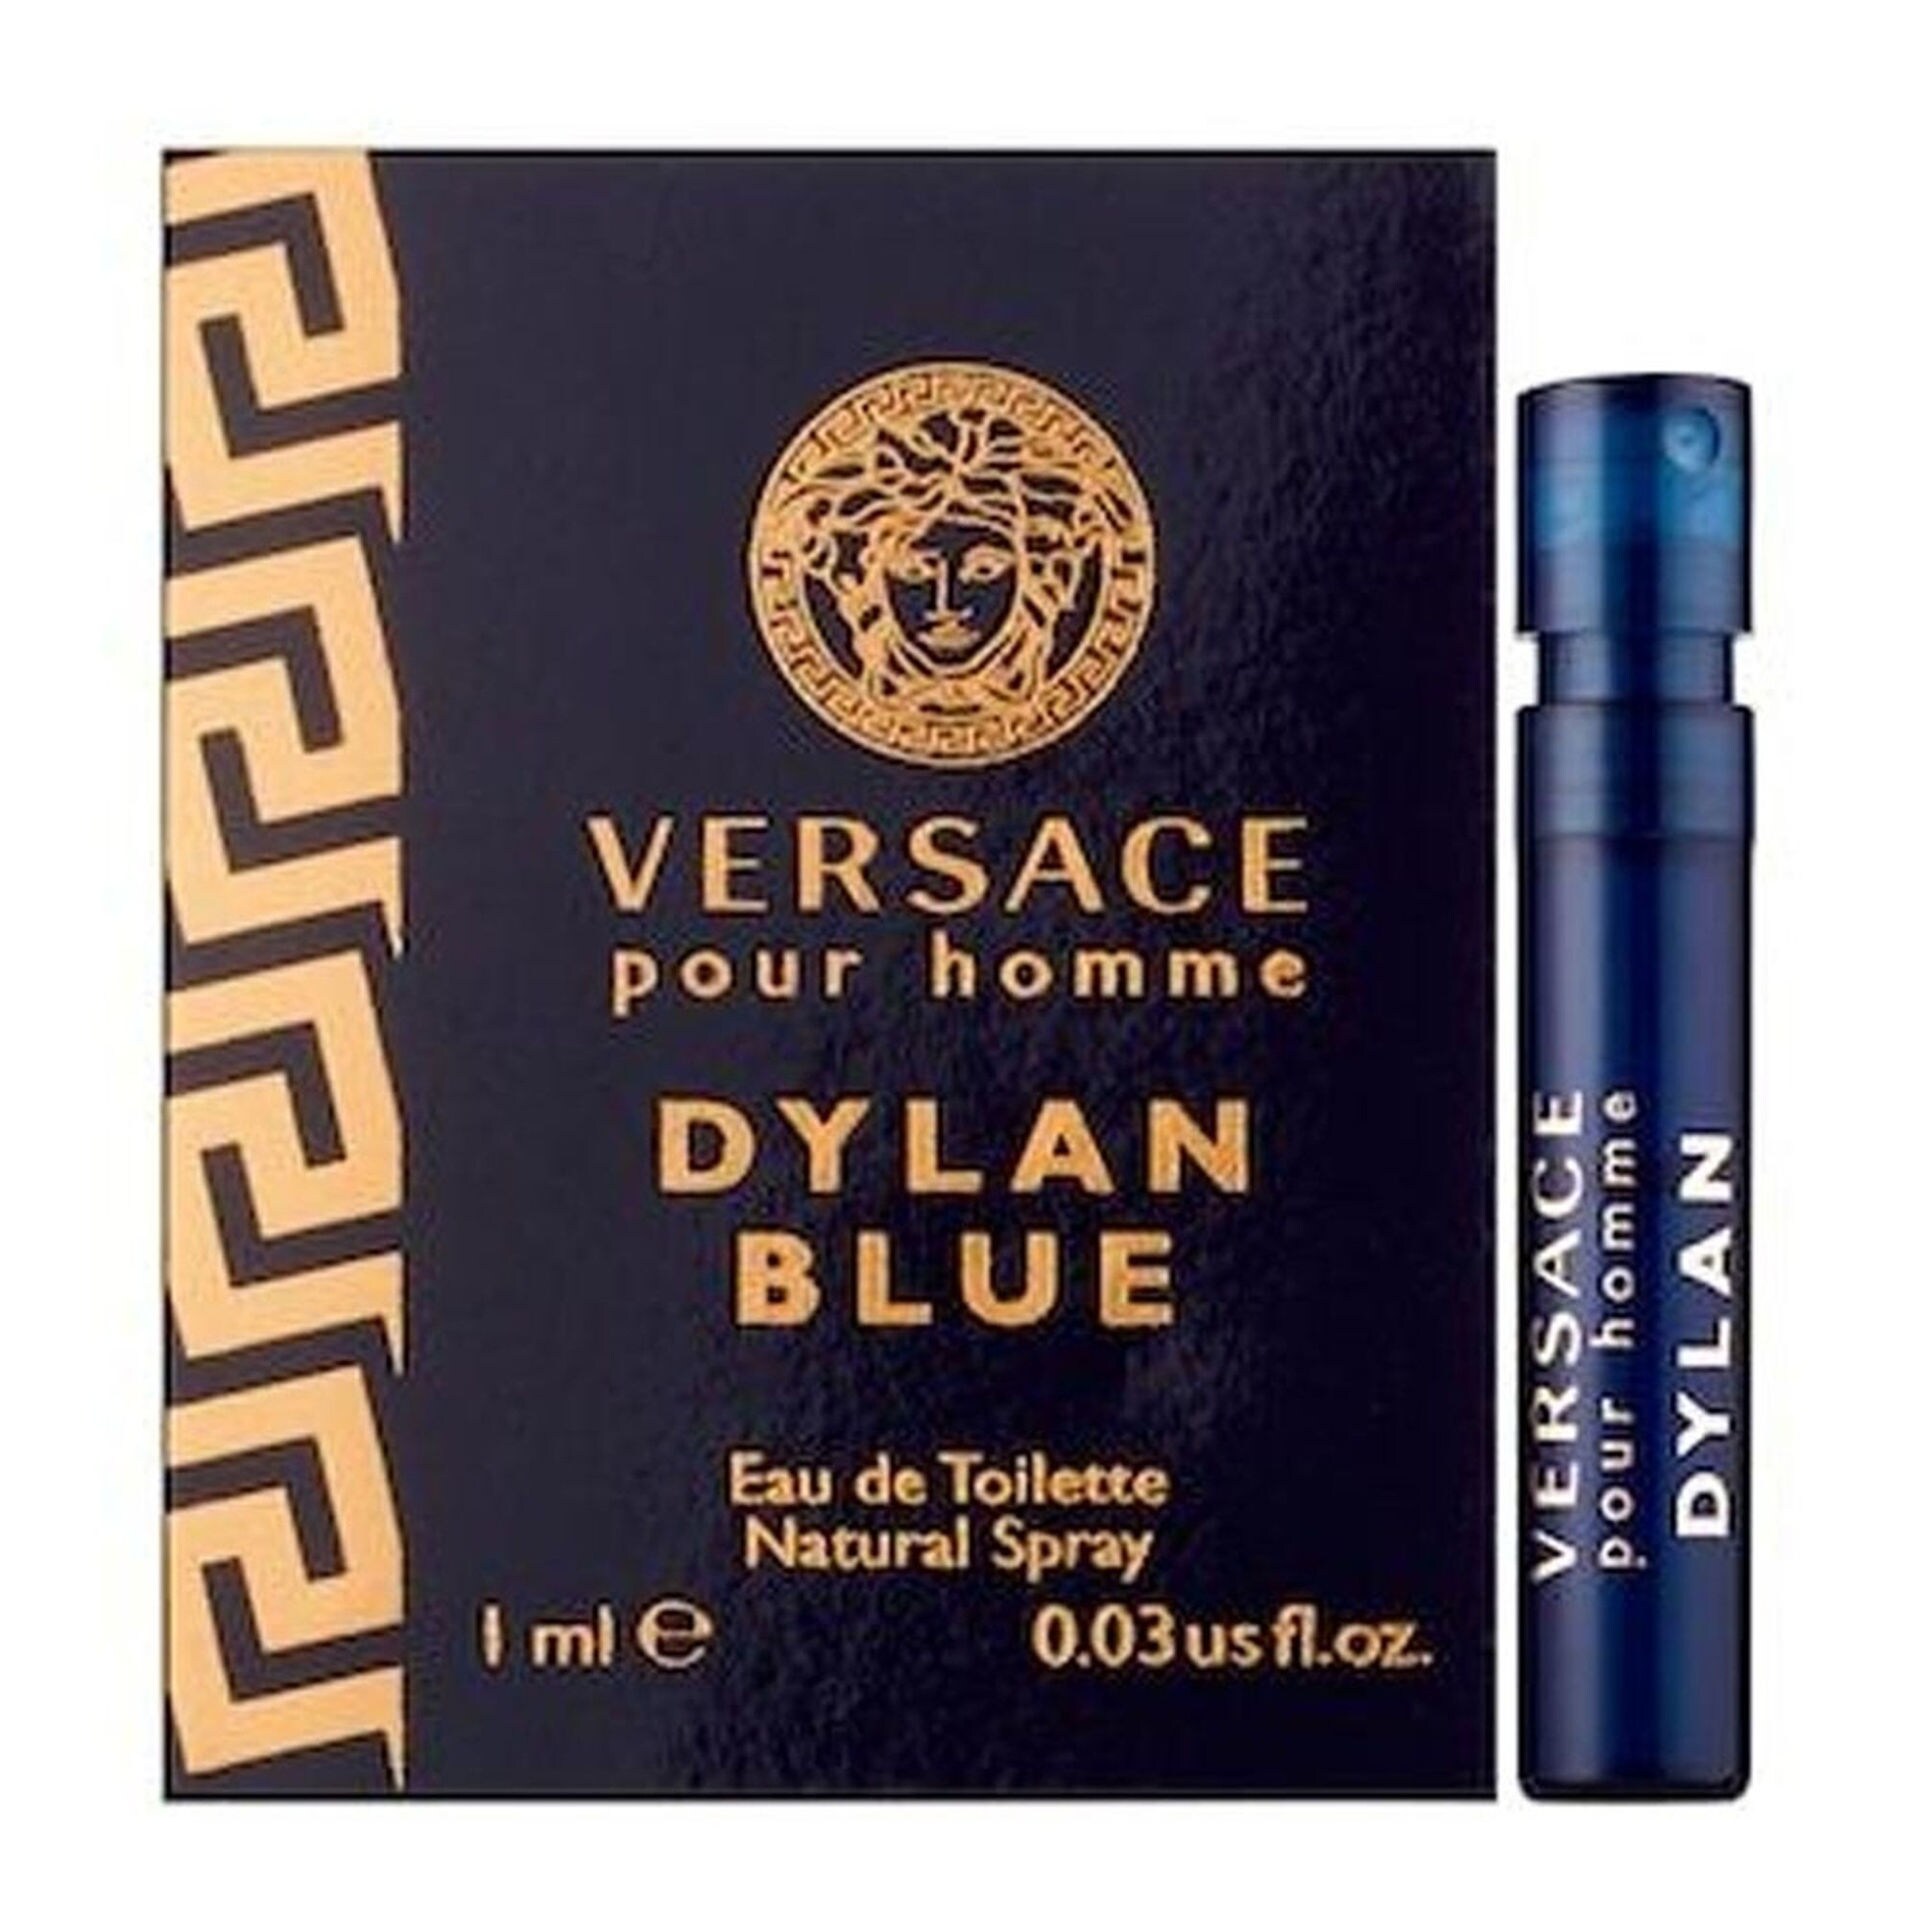 VERSACE DYLAN BLUE, France Gallery, Perfumes